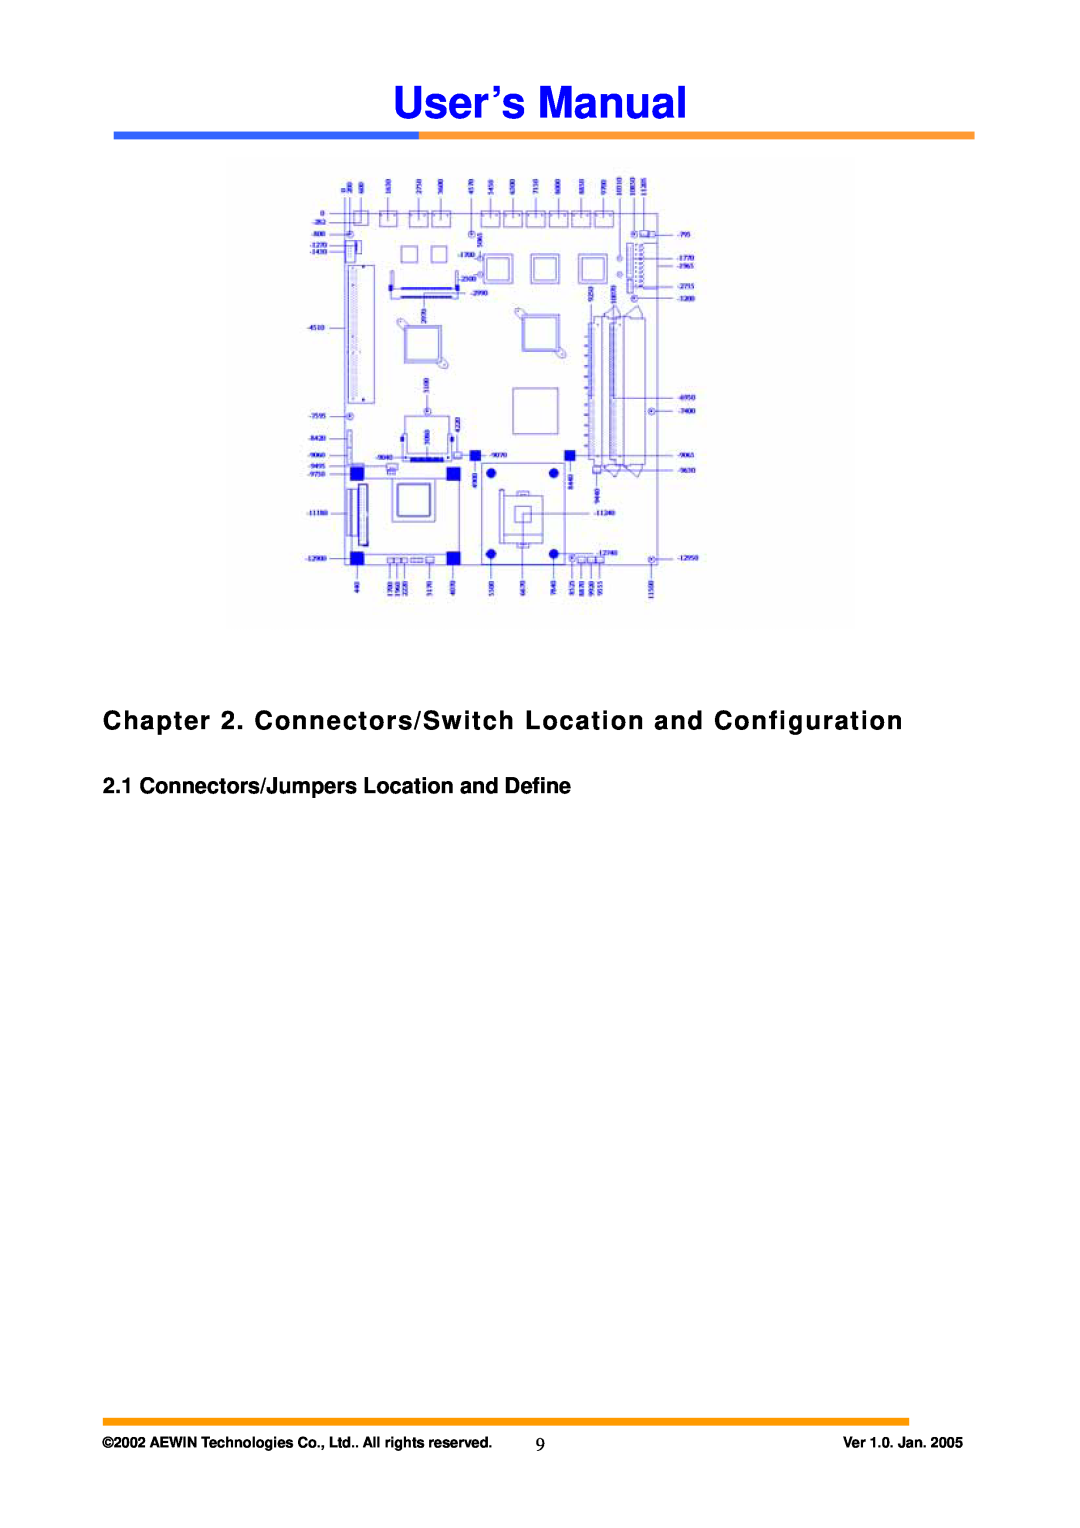 Intel AW-A795 Connectors/Switch Location and Configuration, User’s Manual, Connectors/Jumpers Location and Define 